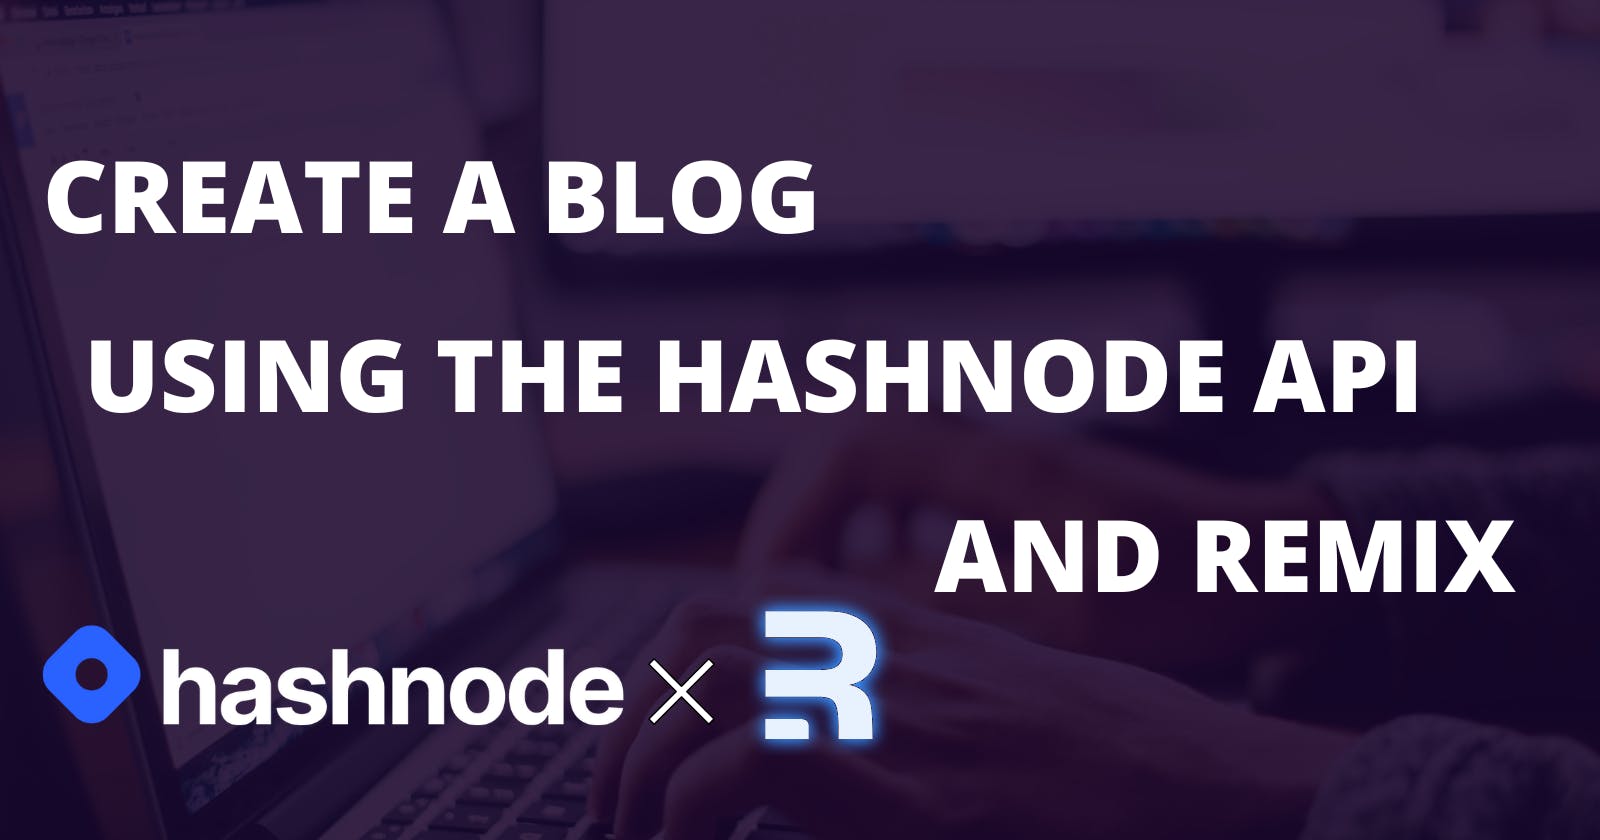 Connect your Hashnode blog to a Remix app with the Hashnode API.